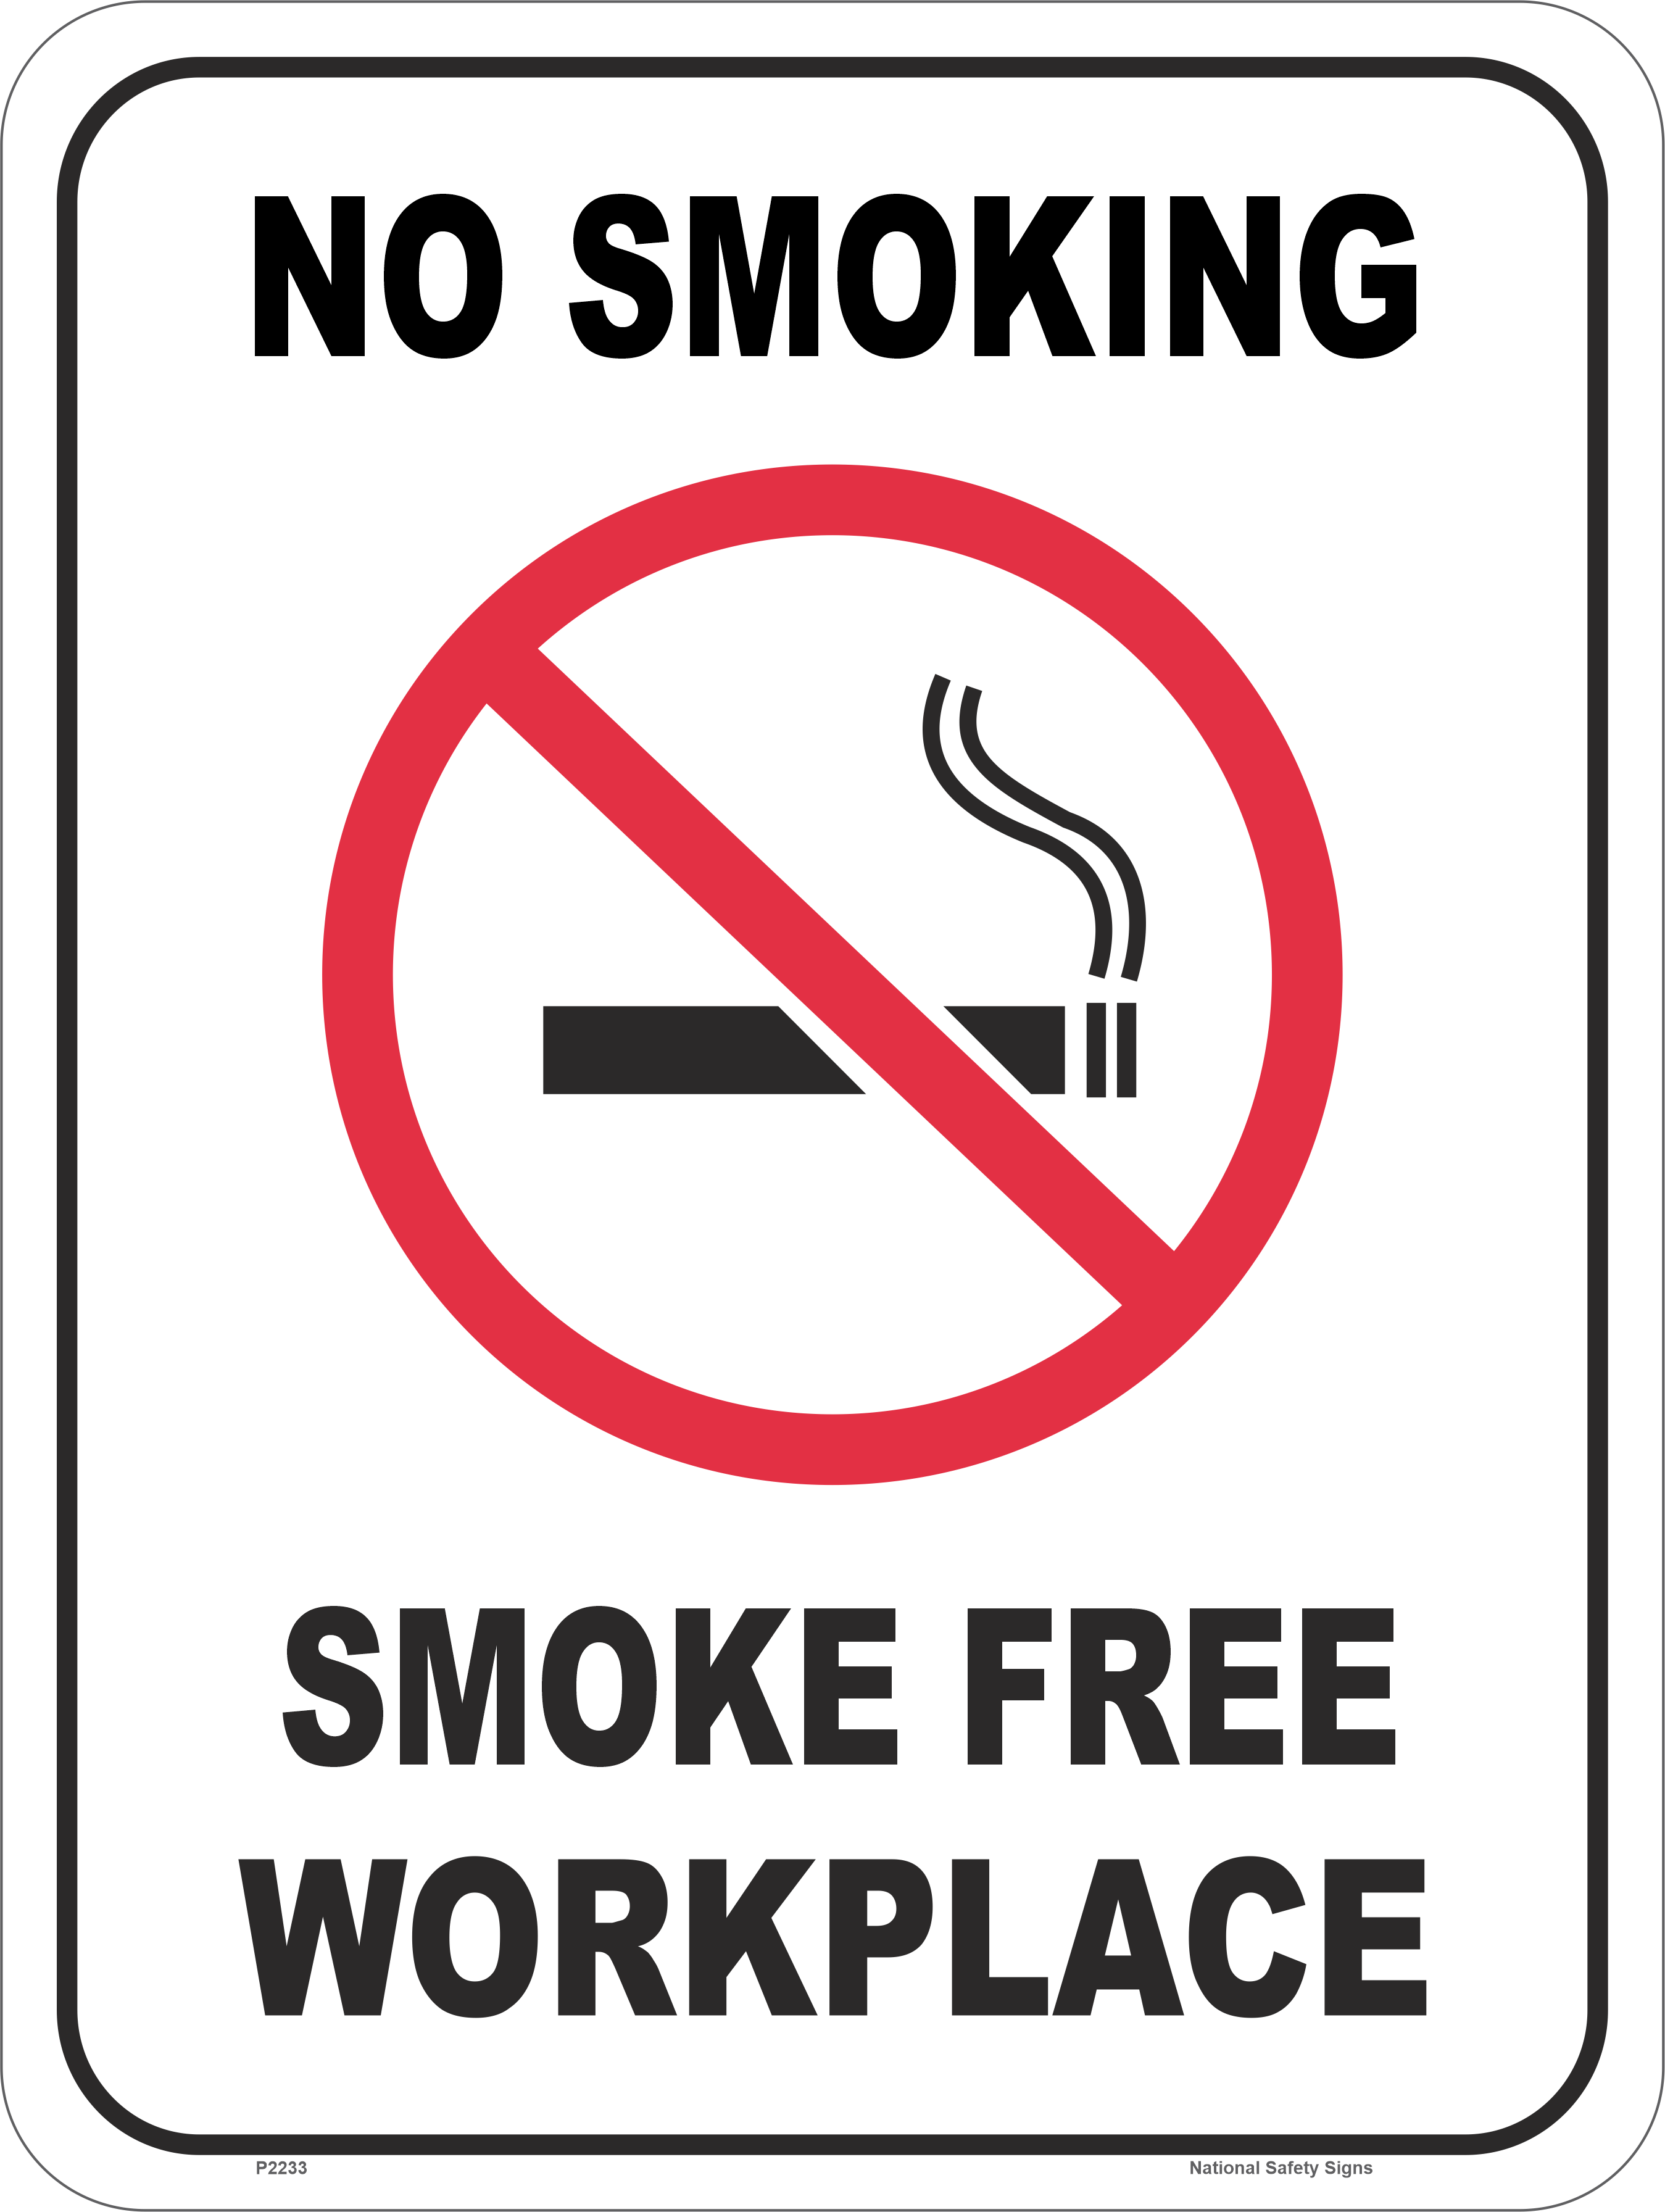 Any Size No Smoking in Area Sign Work Place Warning Danger Safety Vinyl Sticker 